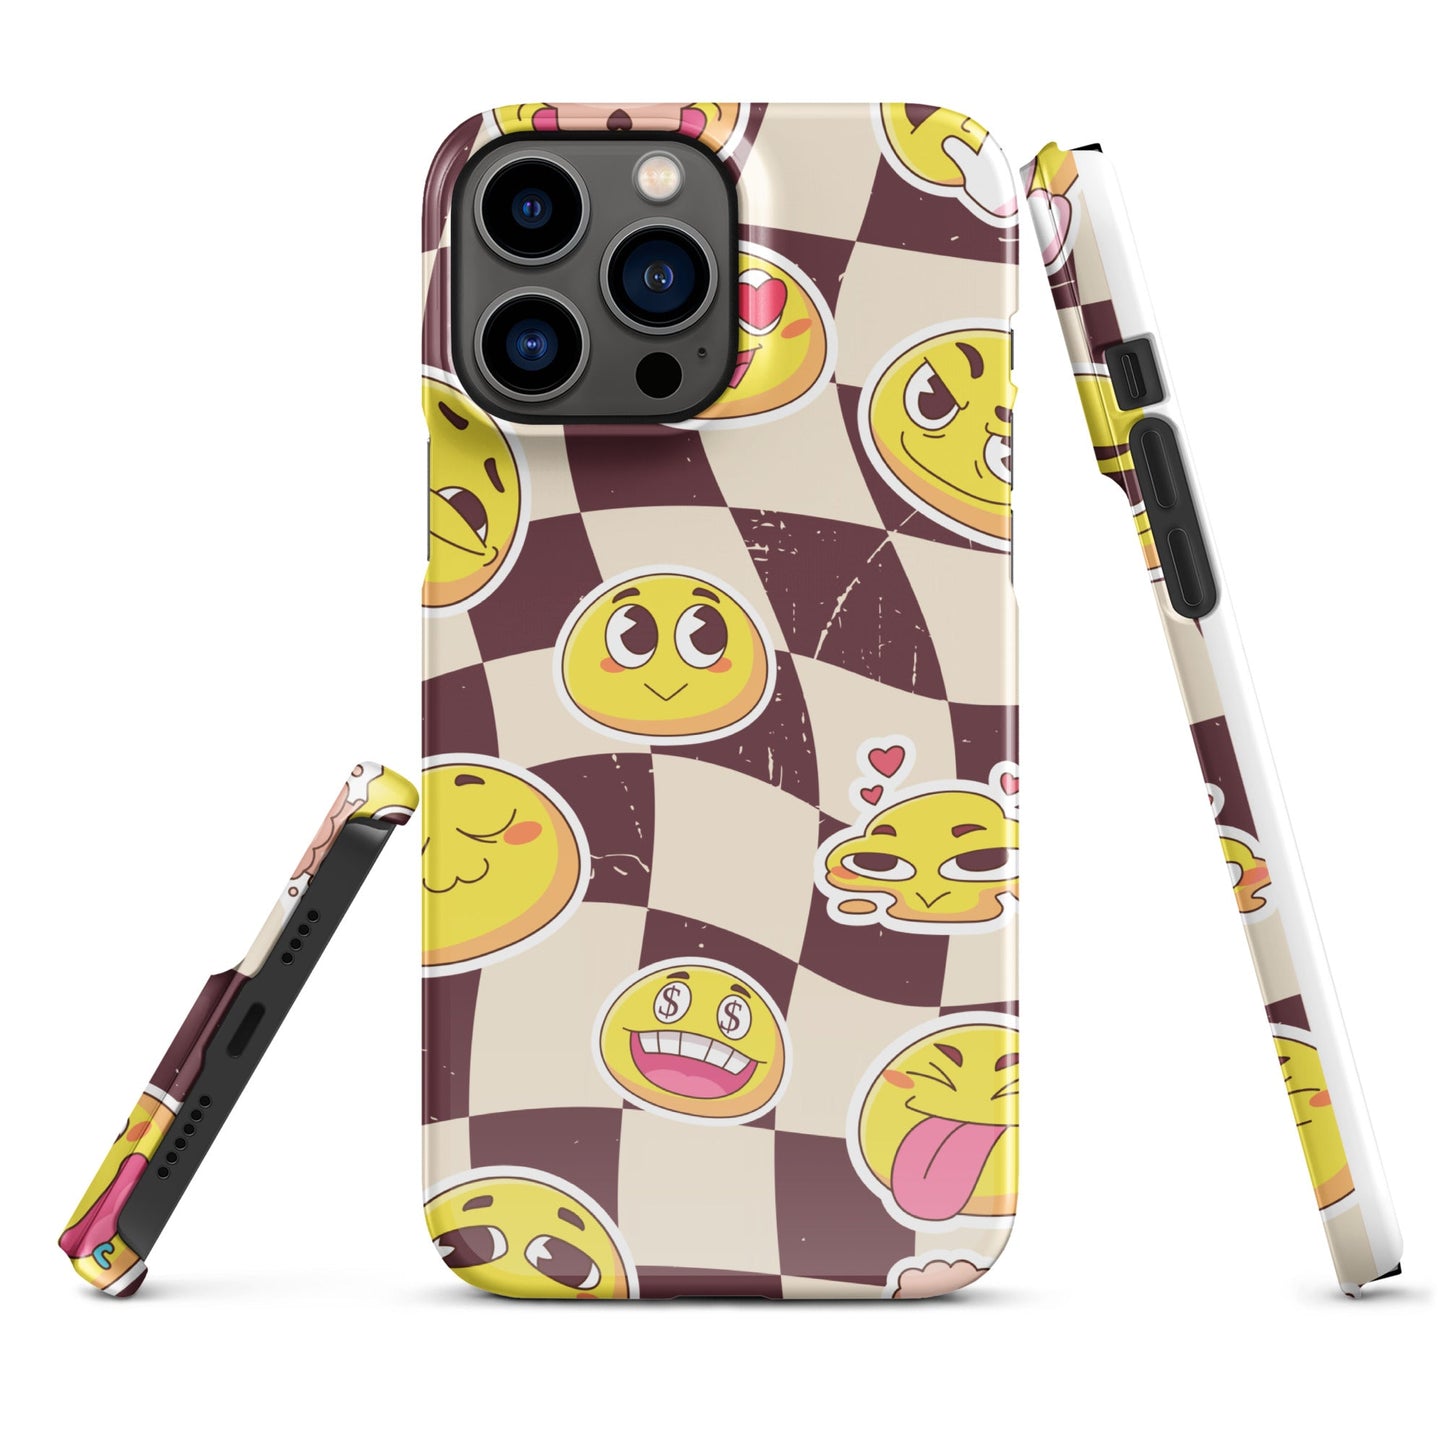 Vintage Emoji Snap Case for iPhone - Retro Charm with Modern Protection